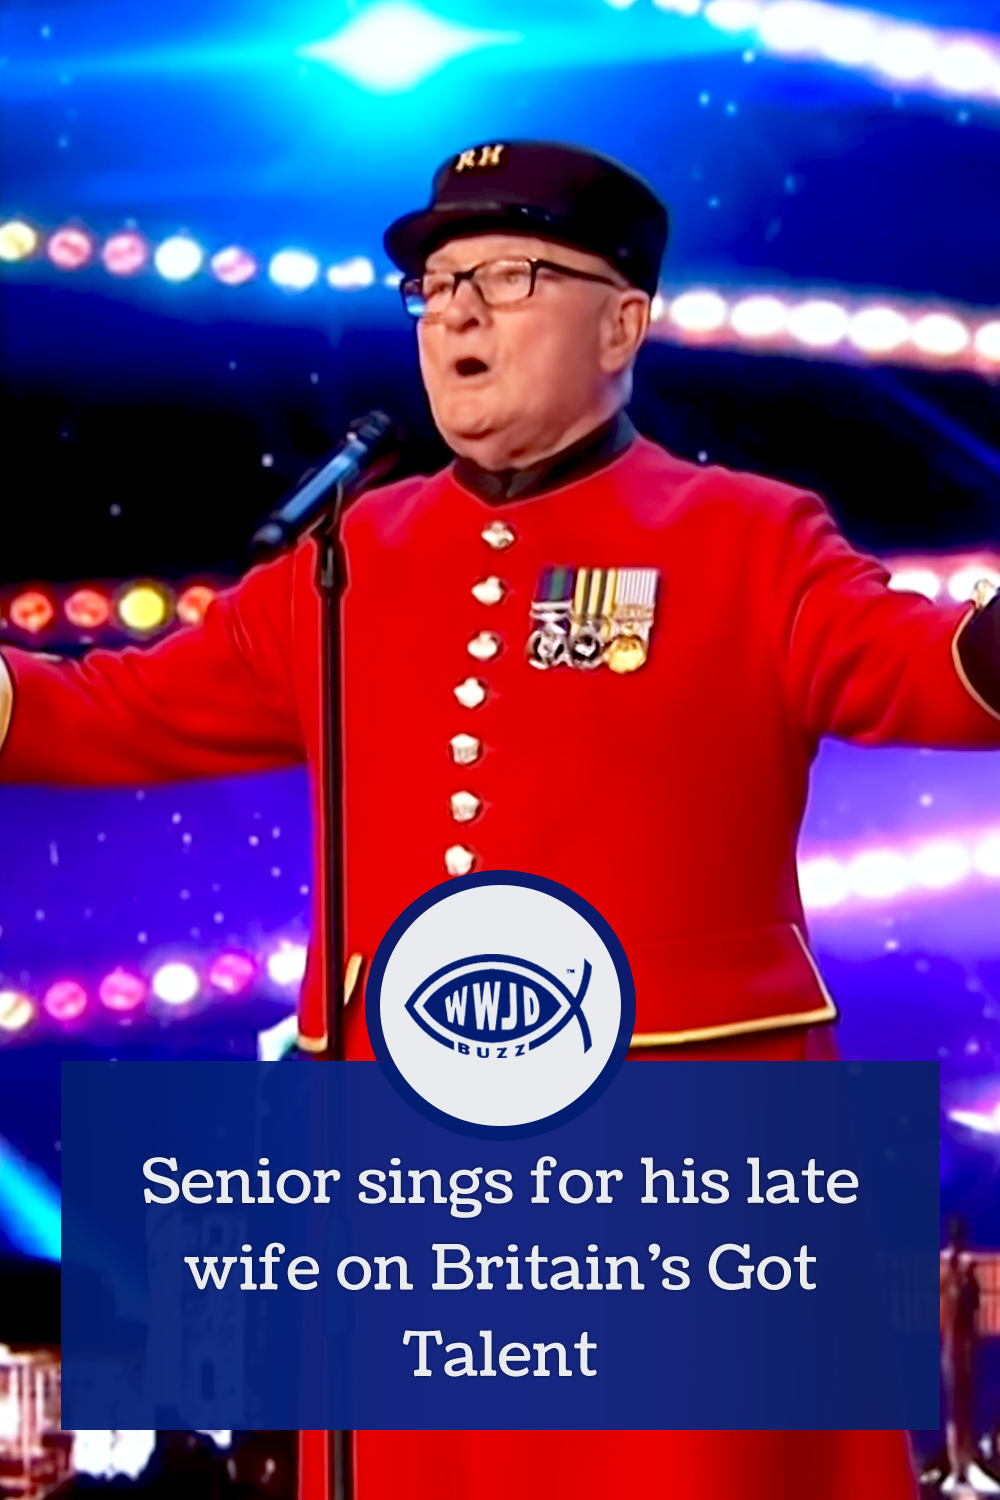 Senior sings for his late wife on Britain’s Got Talent